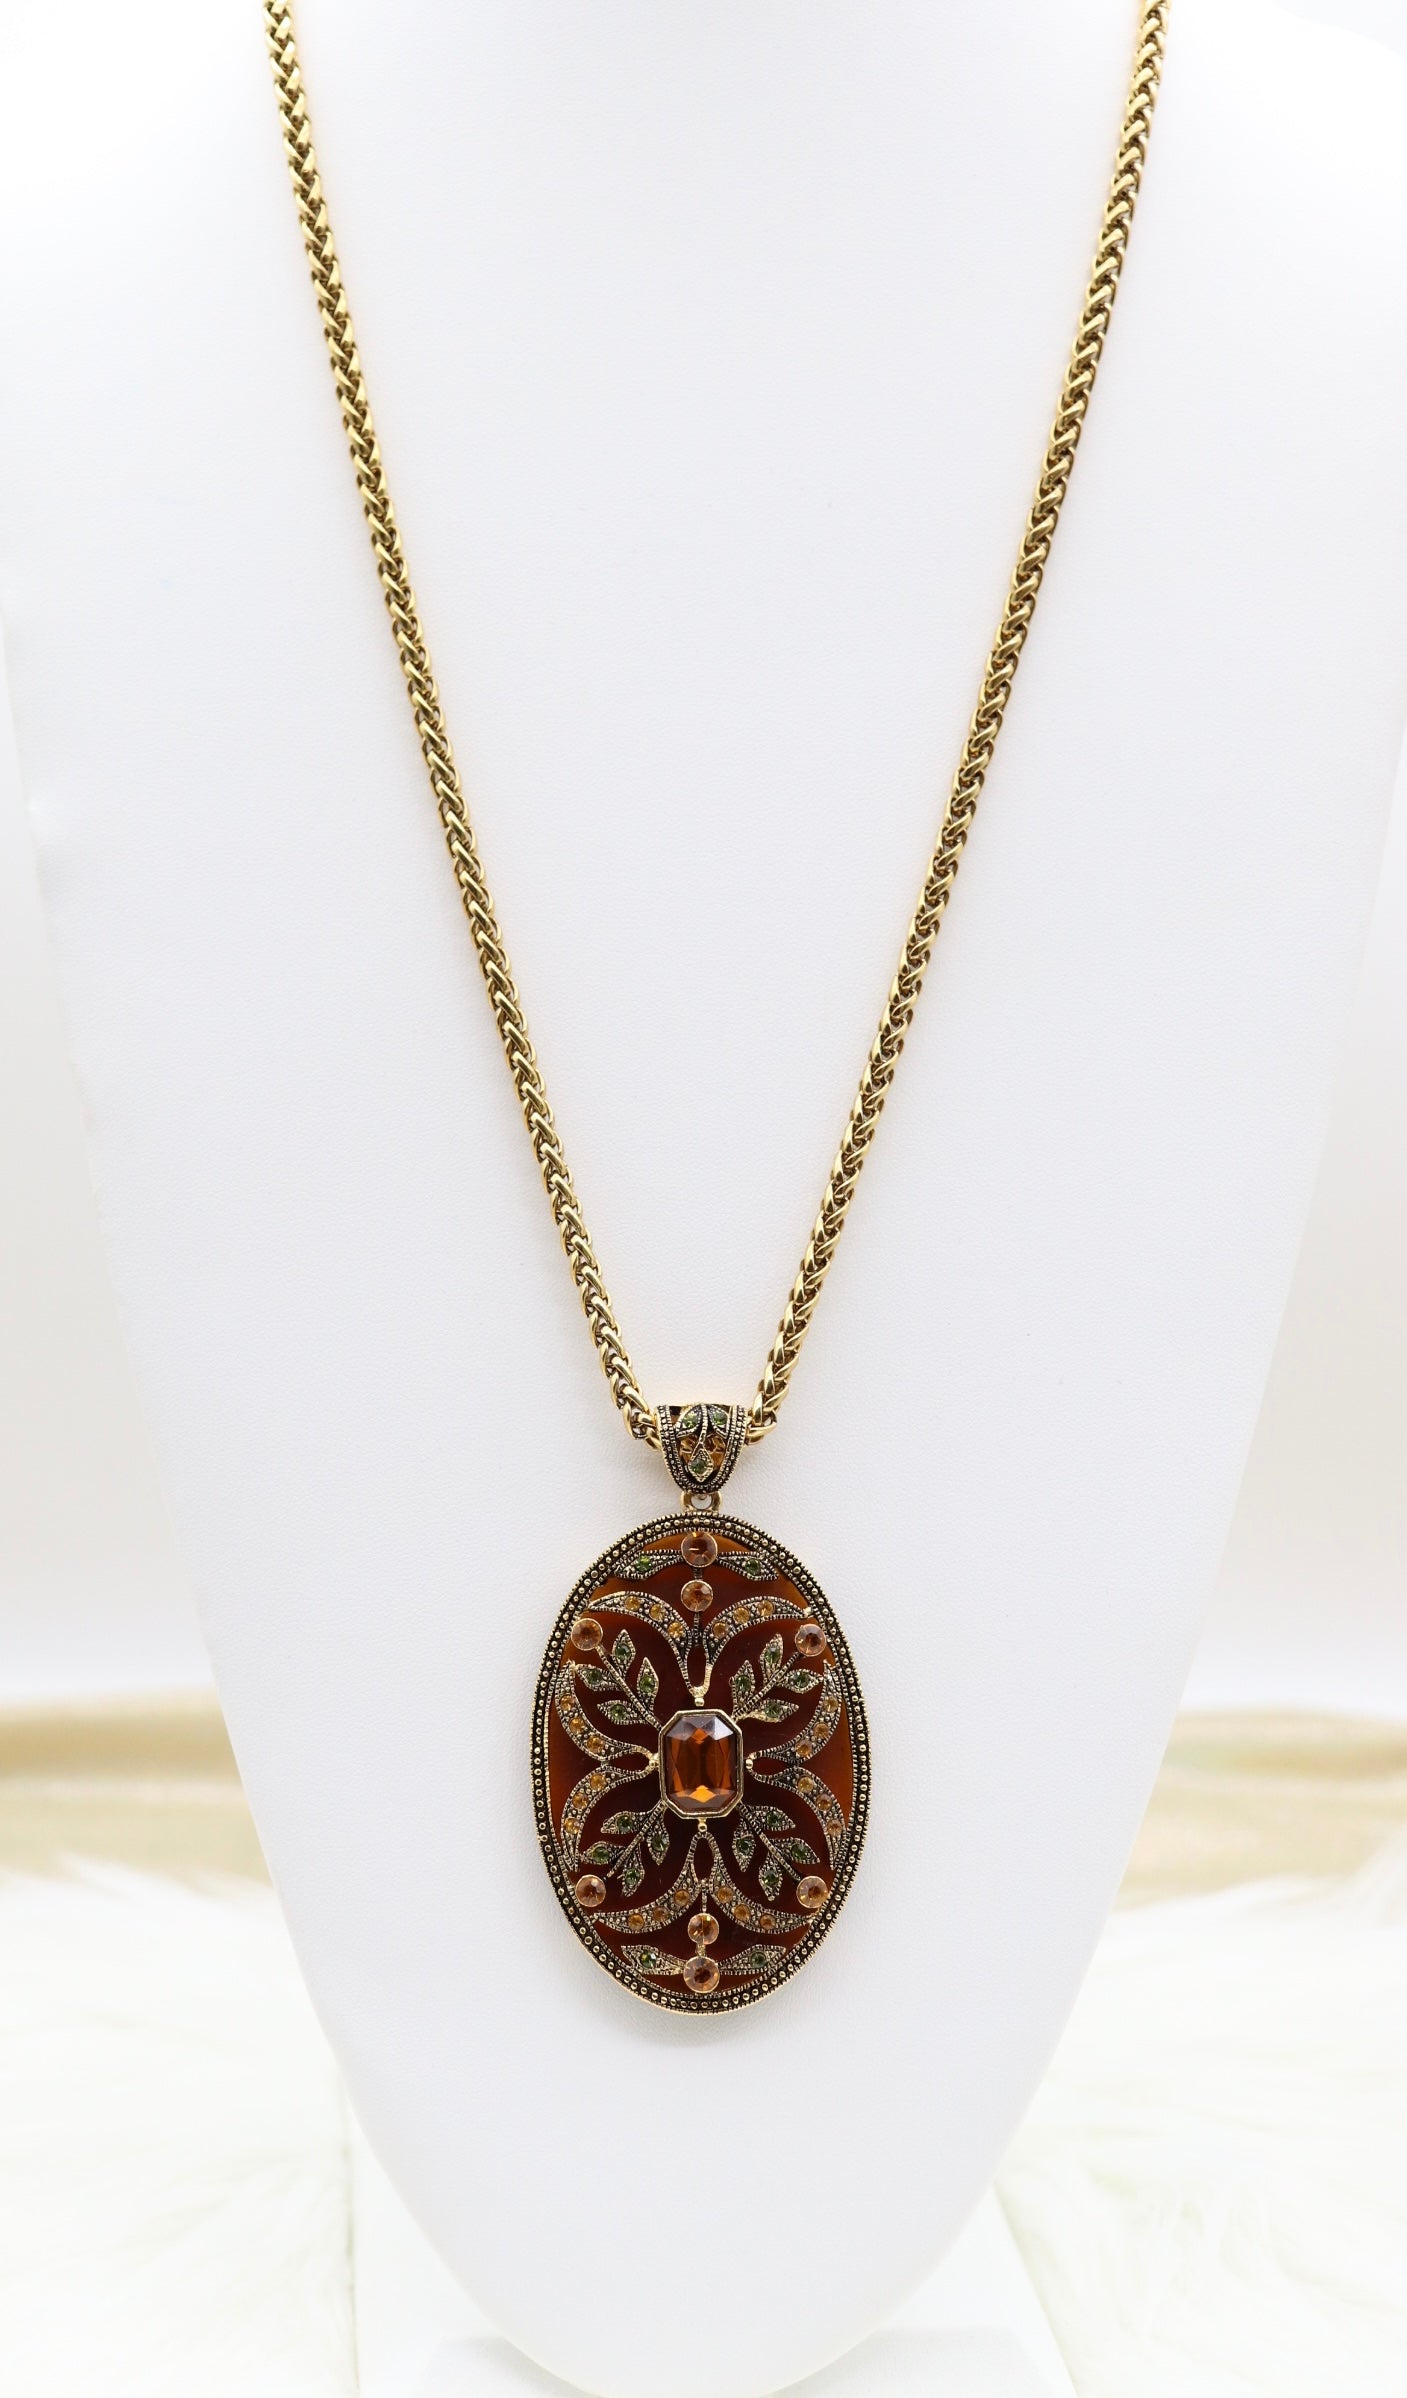 Enameled Renaissance Style With Fine Light Brown CZ Pendant Oval Necklace With Matching Clip On Earrings